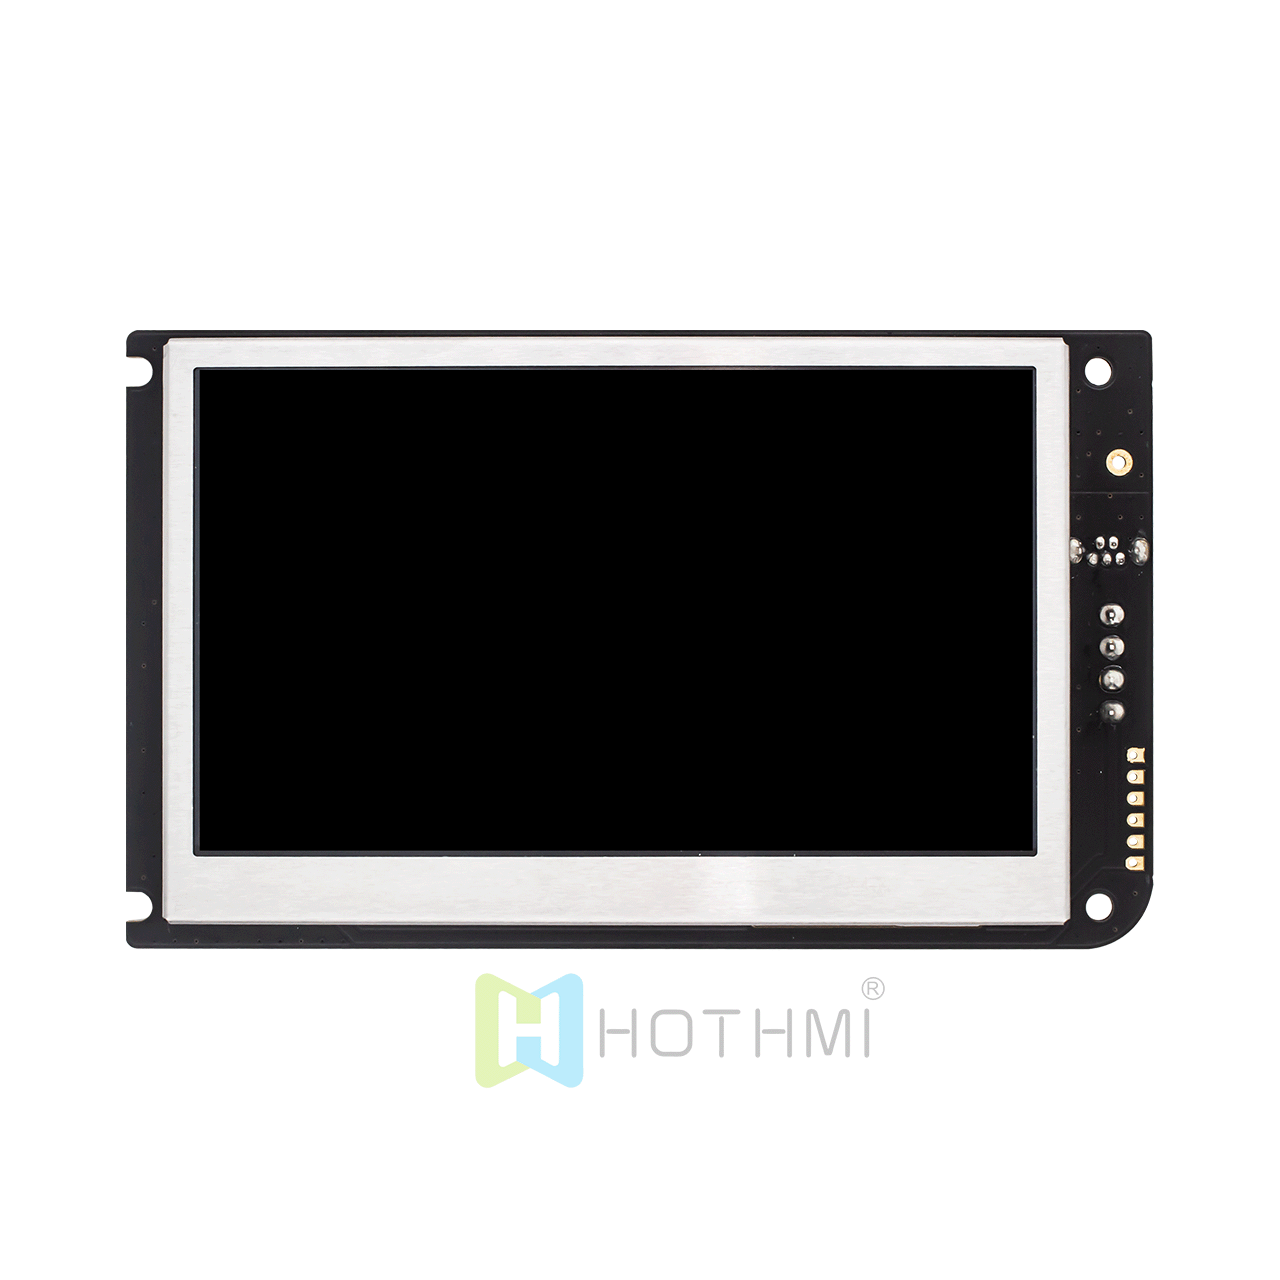 4.3-inch 800x480 dot matrix smart serial screen TFT LCD display module URAT resistive touch screen HMI IPS sunlight readable compatible with Raspberry Pi